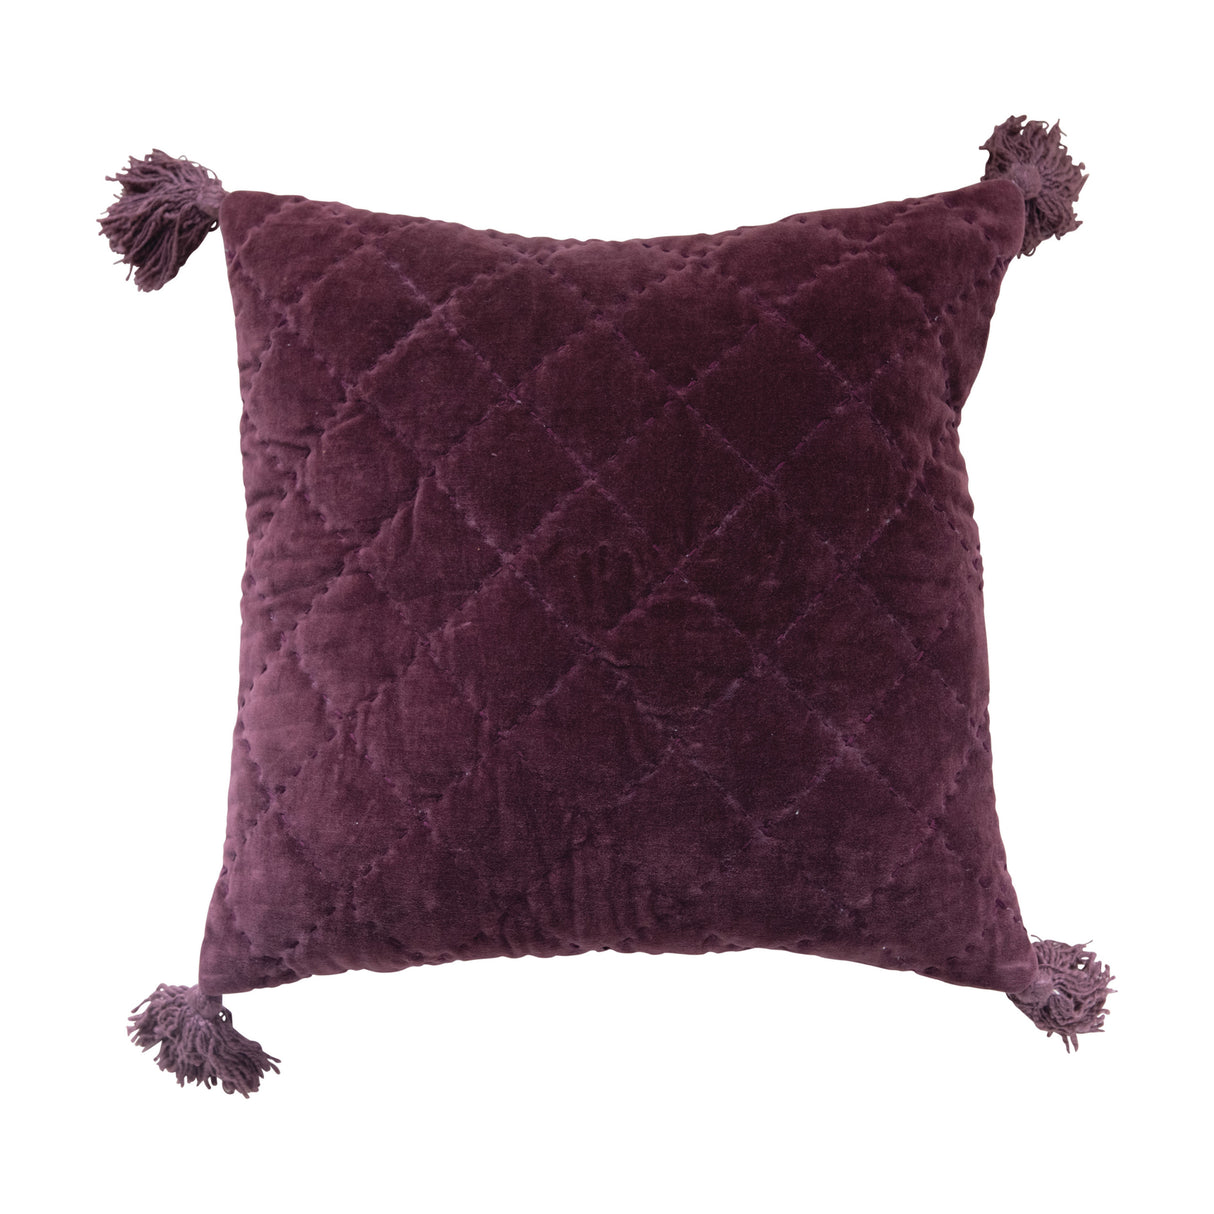 Quilted Cotton Velvet Pillow with Tassels